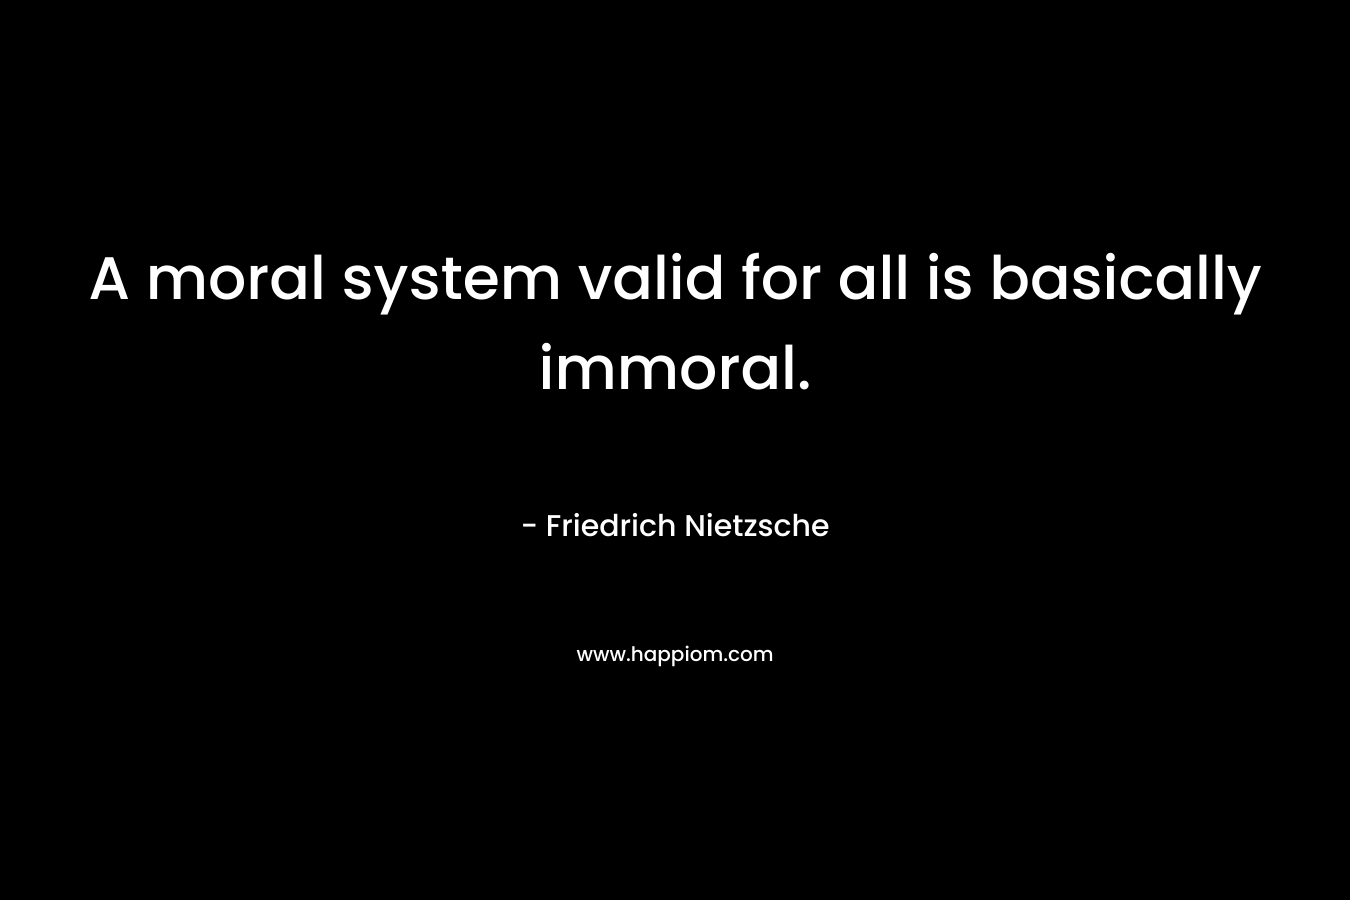 A moral system valid for all is basically immoral. – Friedrich Nietzsche